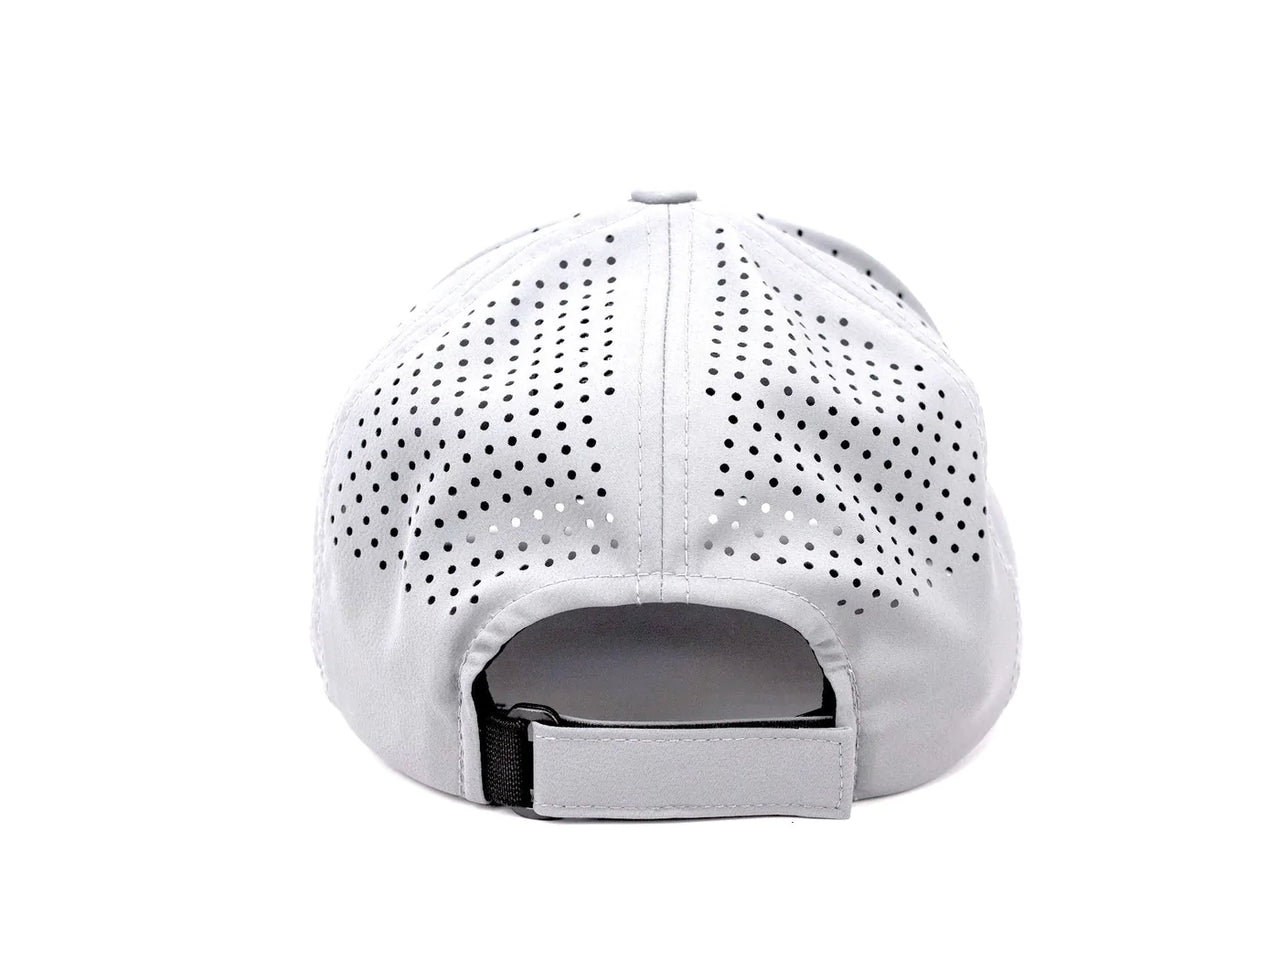 SCARS Curved Performance Hat